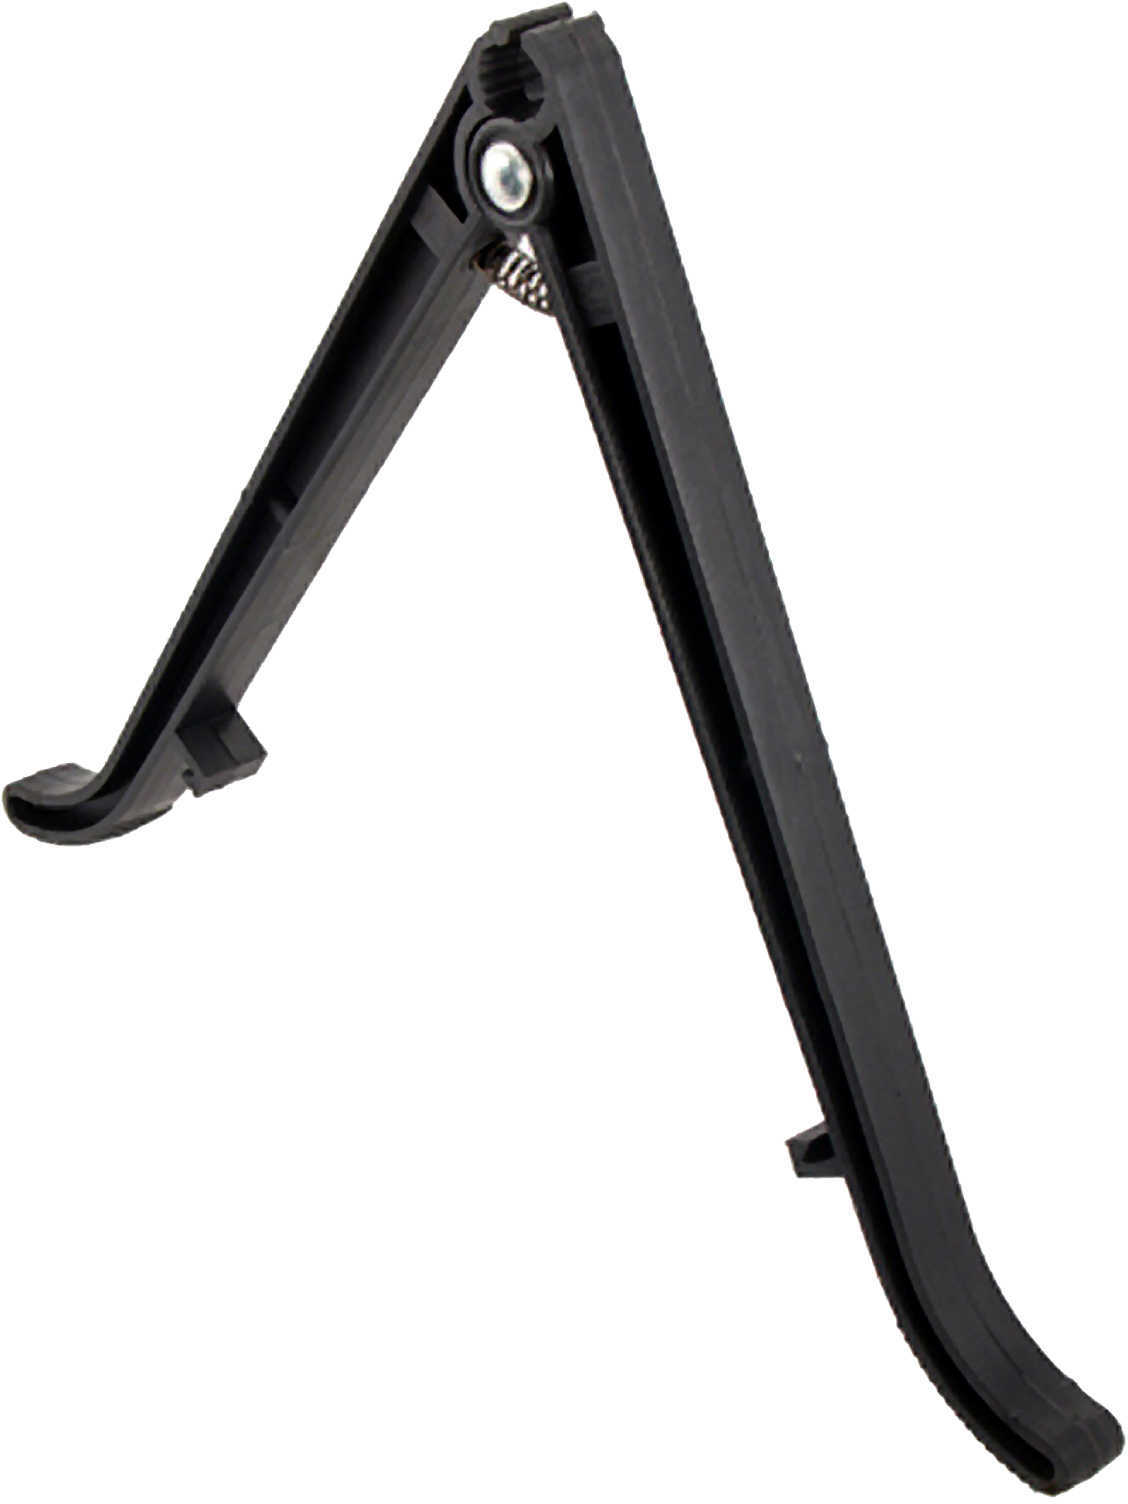 Leapers, Inc. UTG Synthetic Clamp-On Bipod Md: Tl-BP70